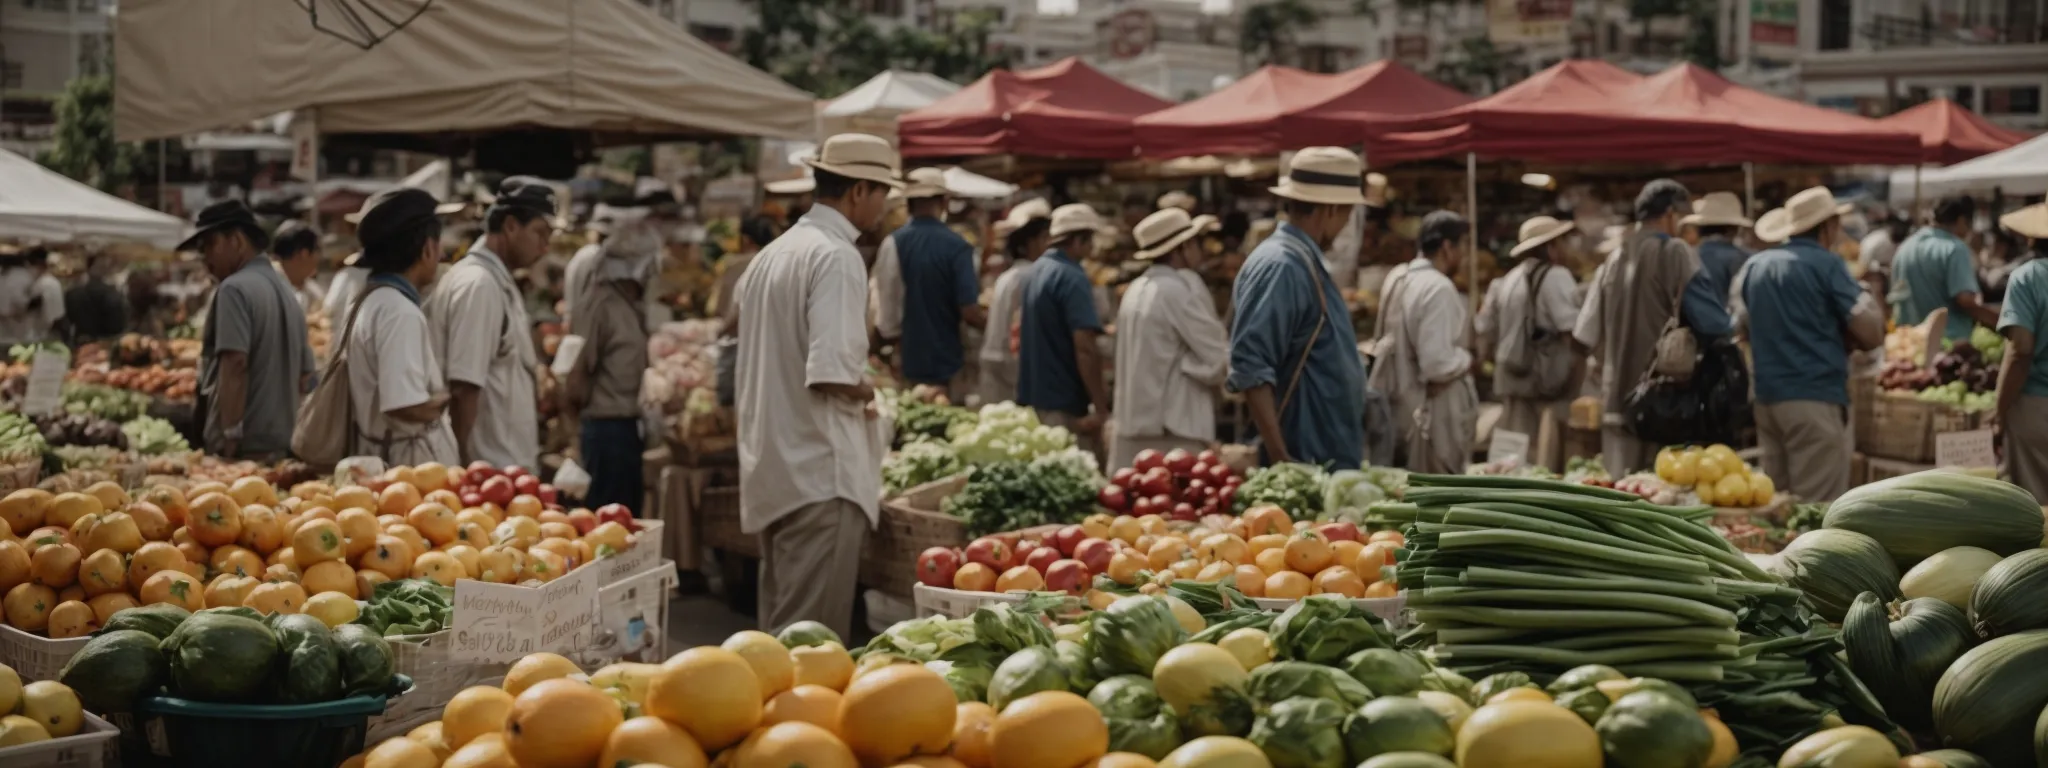 a bustling farmer's market with vendors displaying fresh produce to a community of shoppers.